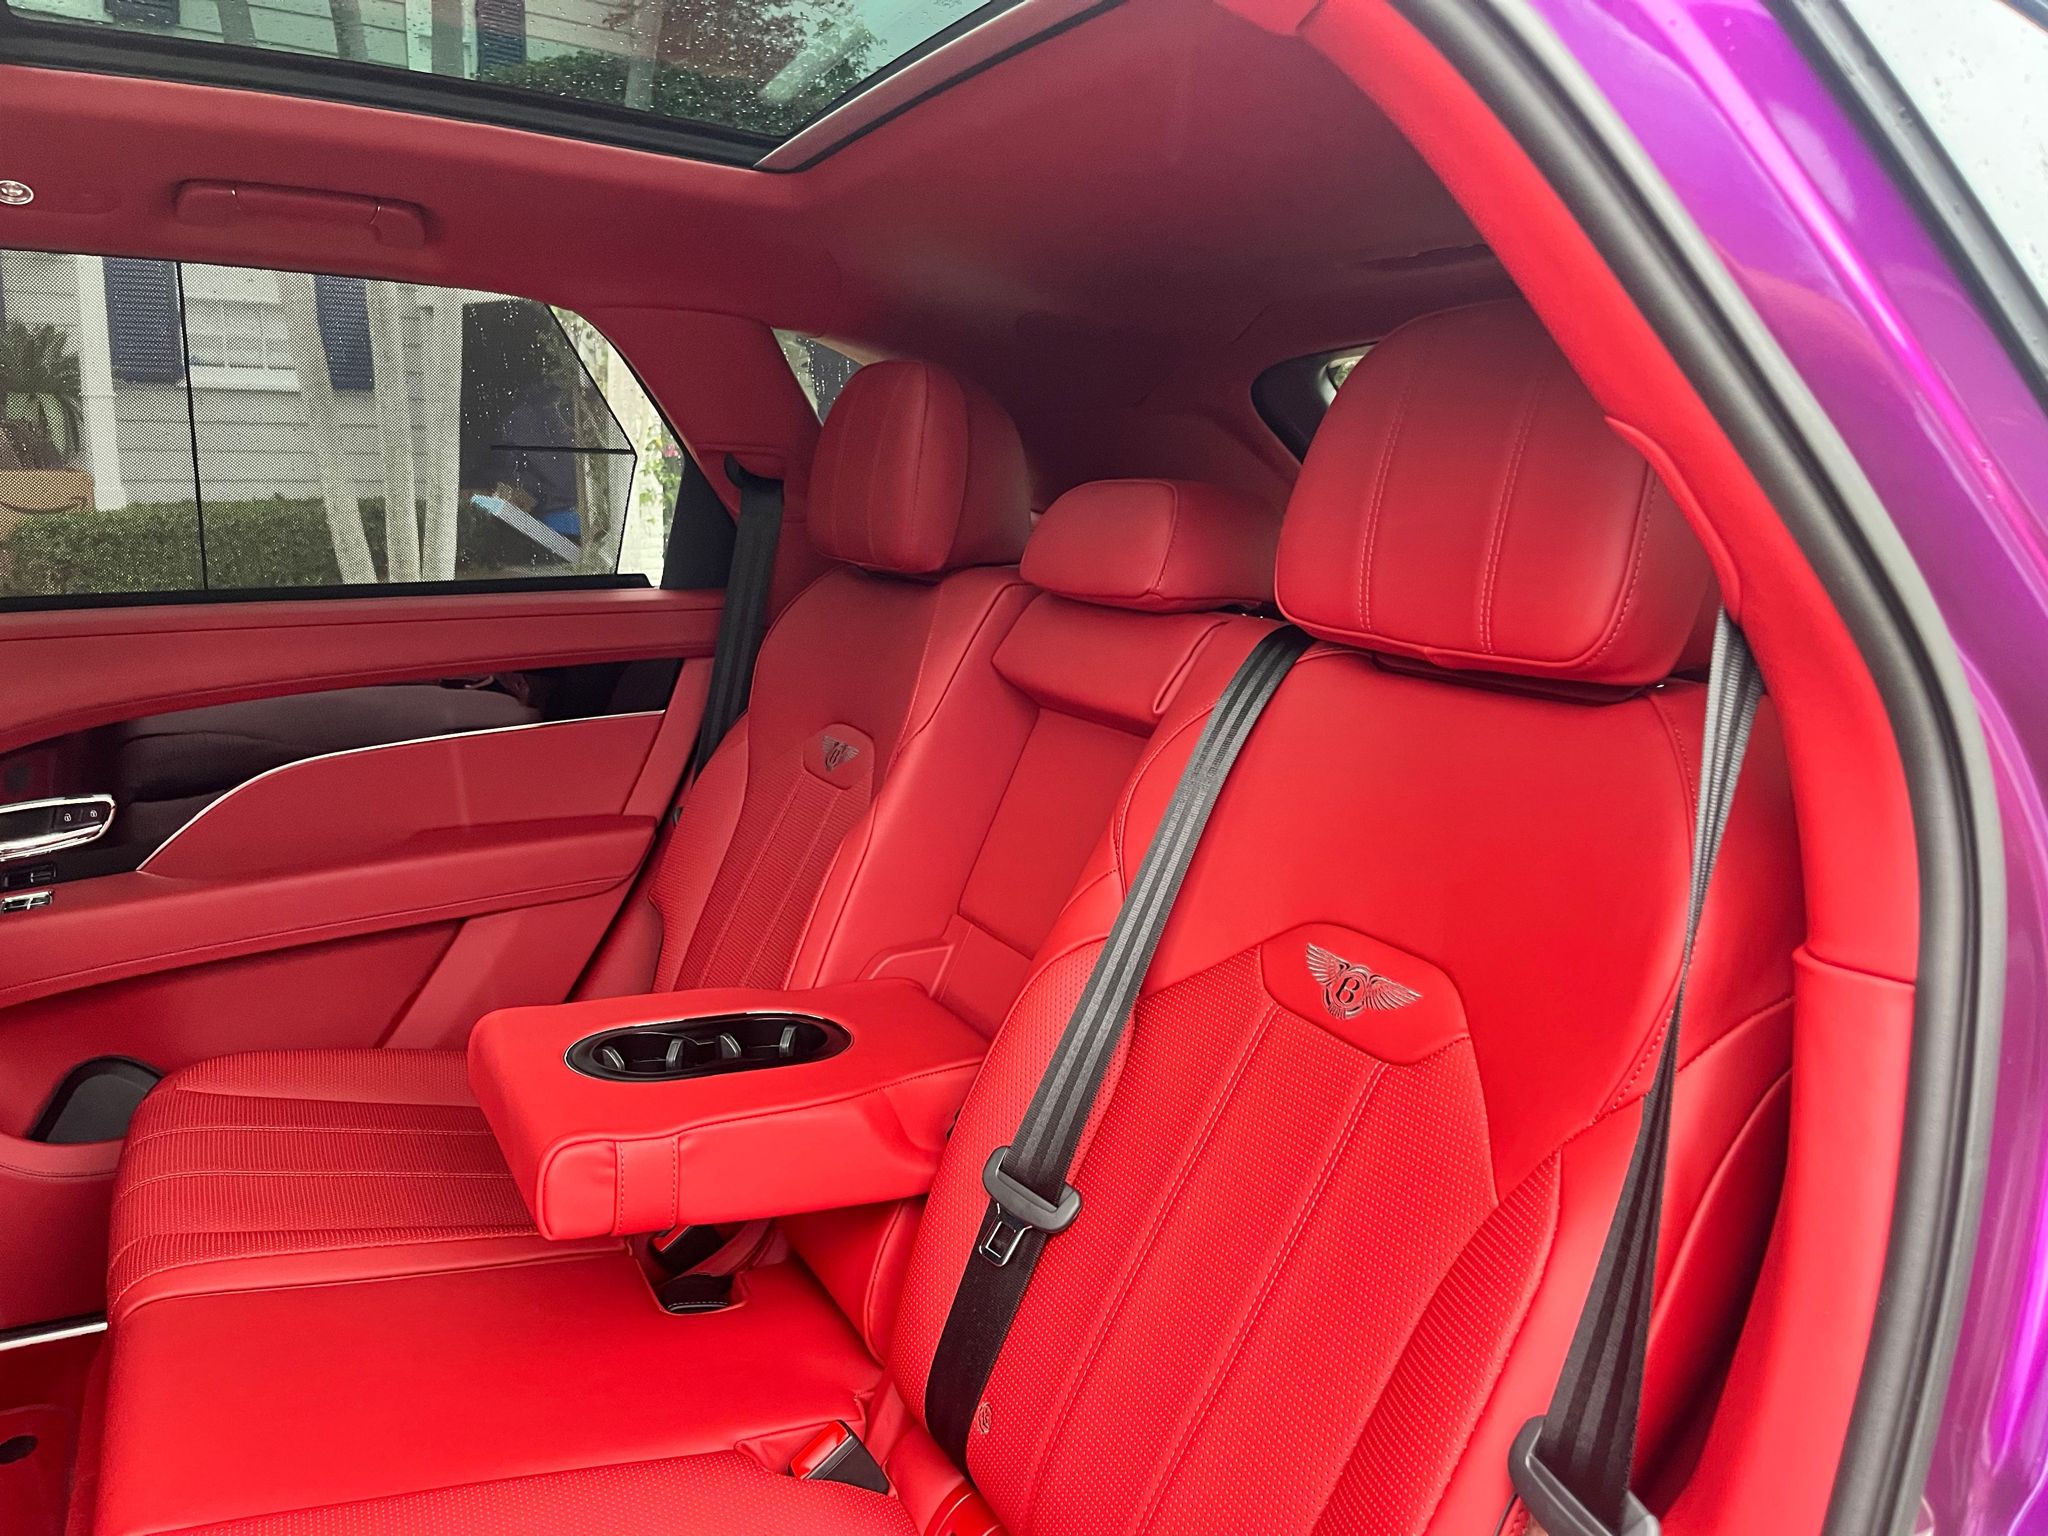 Bentley cars - inside, red style